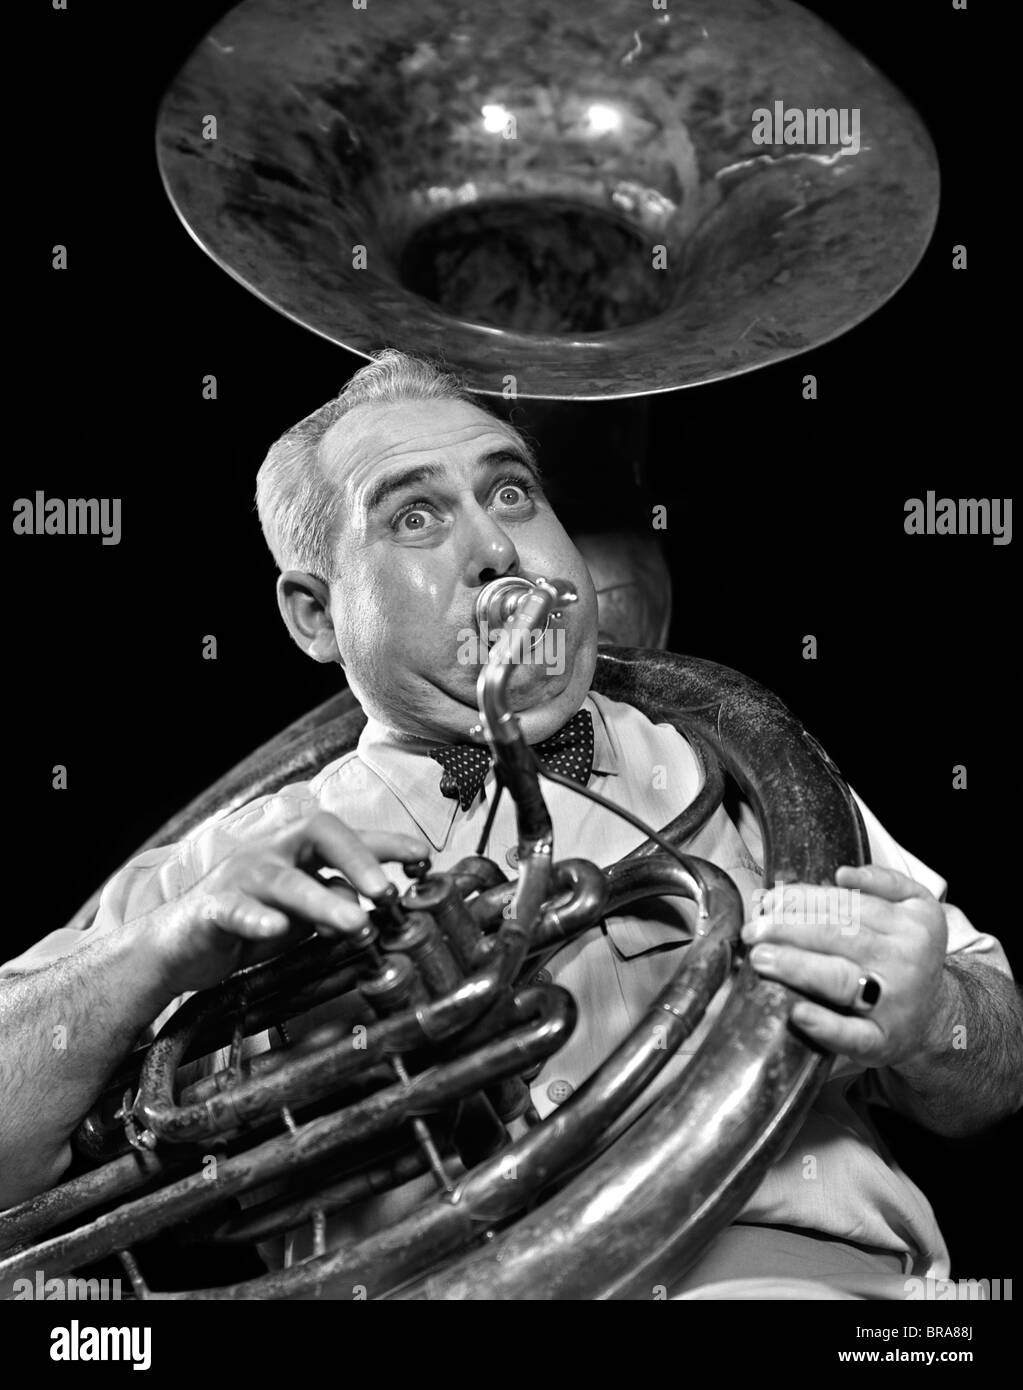 1940s CHUBBY MAN MUSICIAN WITH POLKA DOT BOW TIE AND BULGING EYES PLAYING A SOUSAPHONE Stock Photo